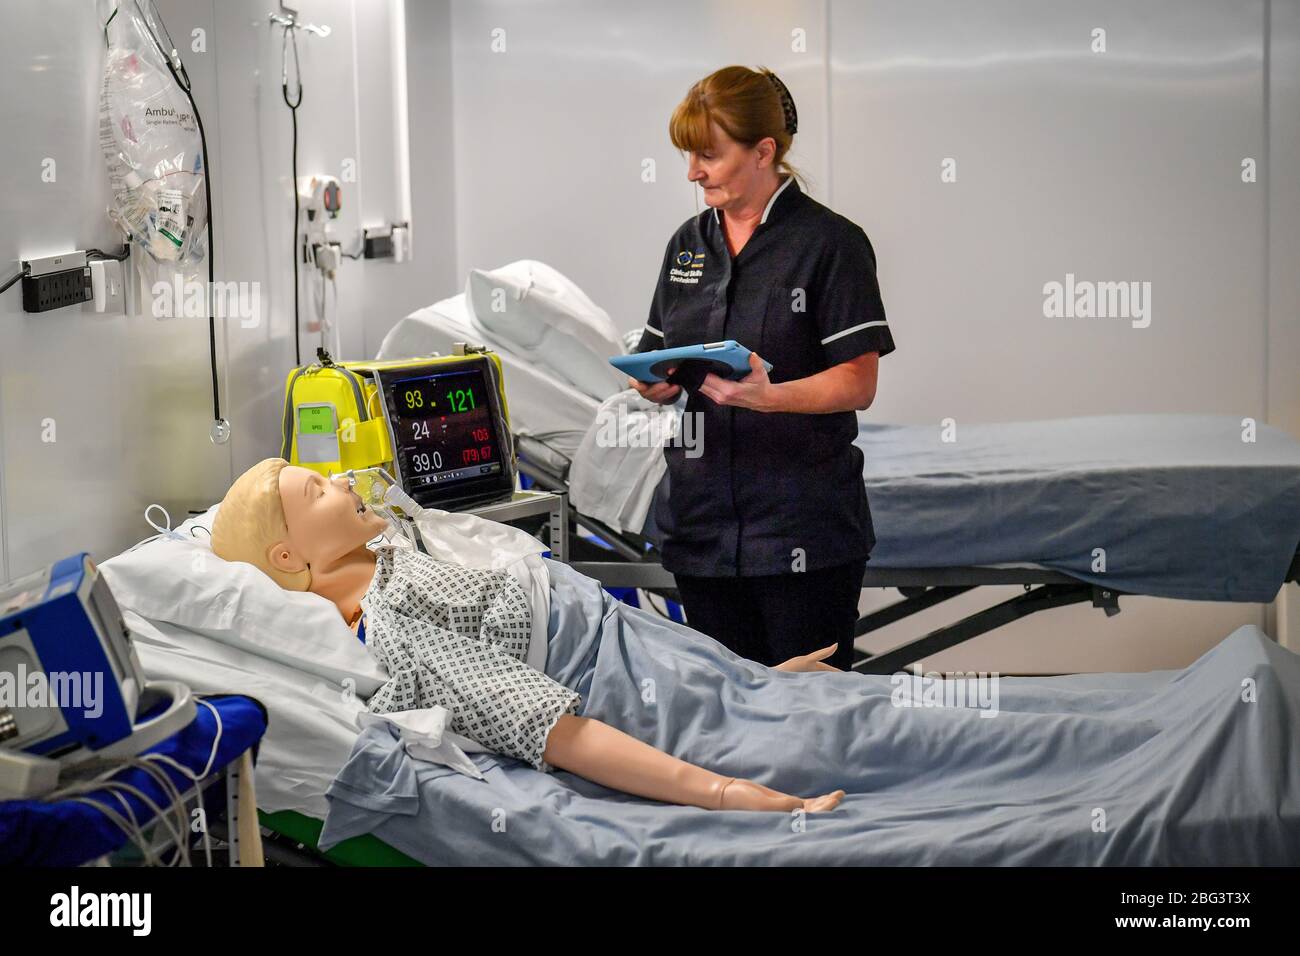 A simulation technician takes part in medical training inside a ward at the official opening of the new Dragon's Heart Hospital, built at the Principality Stadium, Cardiff, to care for coronavirus patients. Stock Photo